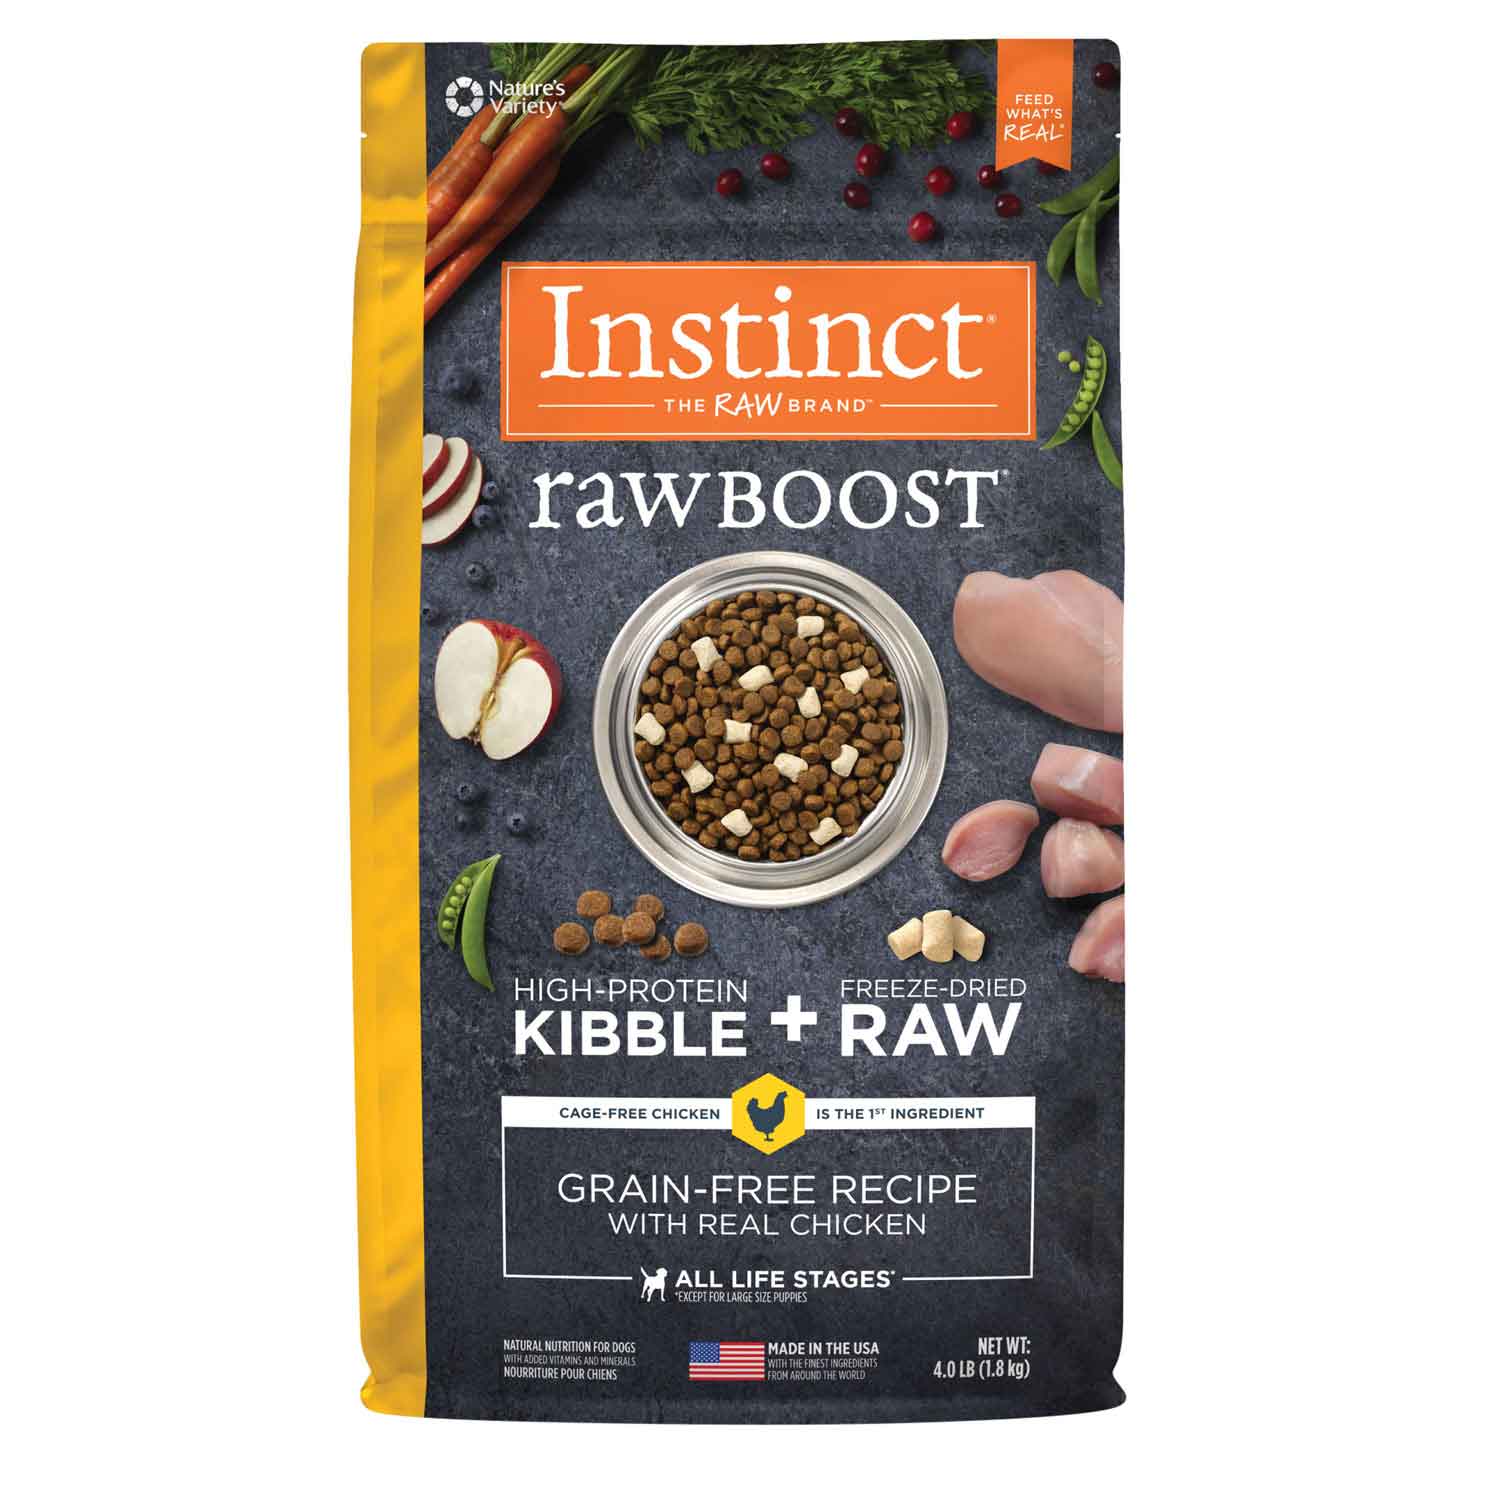 Instinct Raw Boost Grain-Free Recipe with Real Chicken Dry Dog Food with Freeze-Dried Raw Pieces, 4 Pound Bag